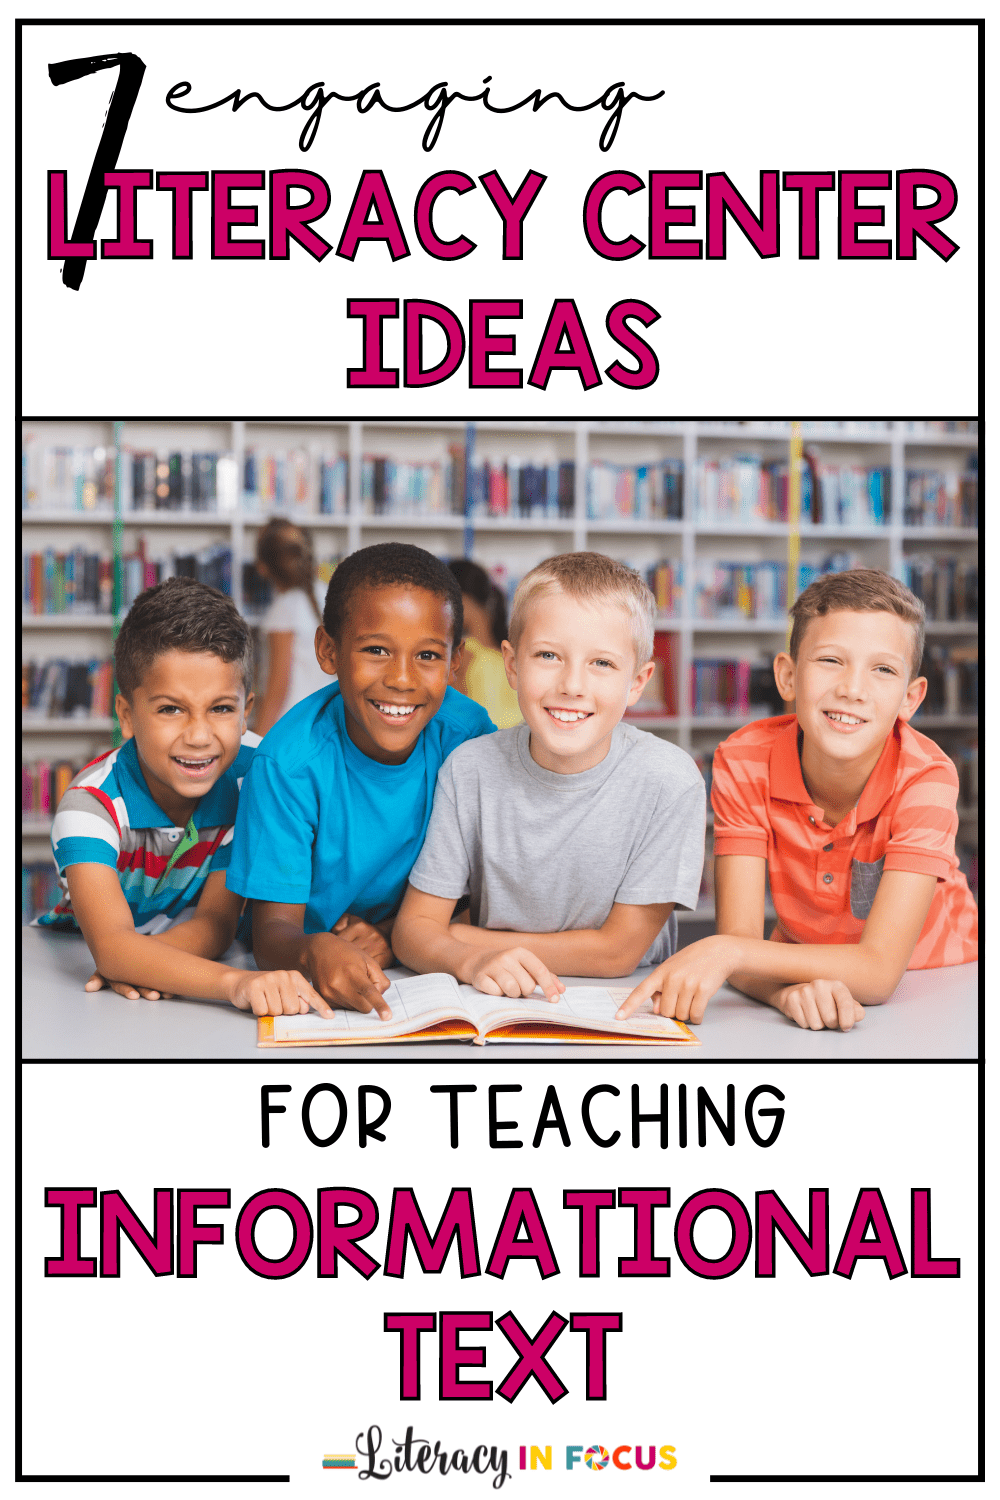 7 Engaging Literacy Center Ideas for Teaching Informational Text